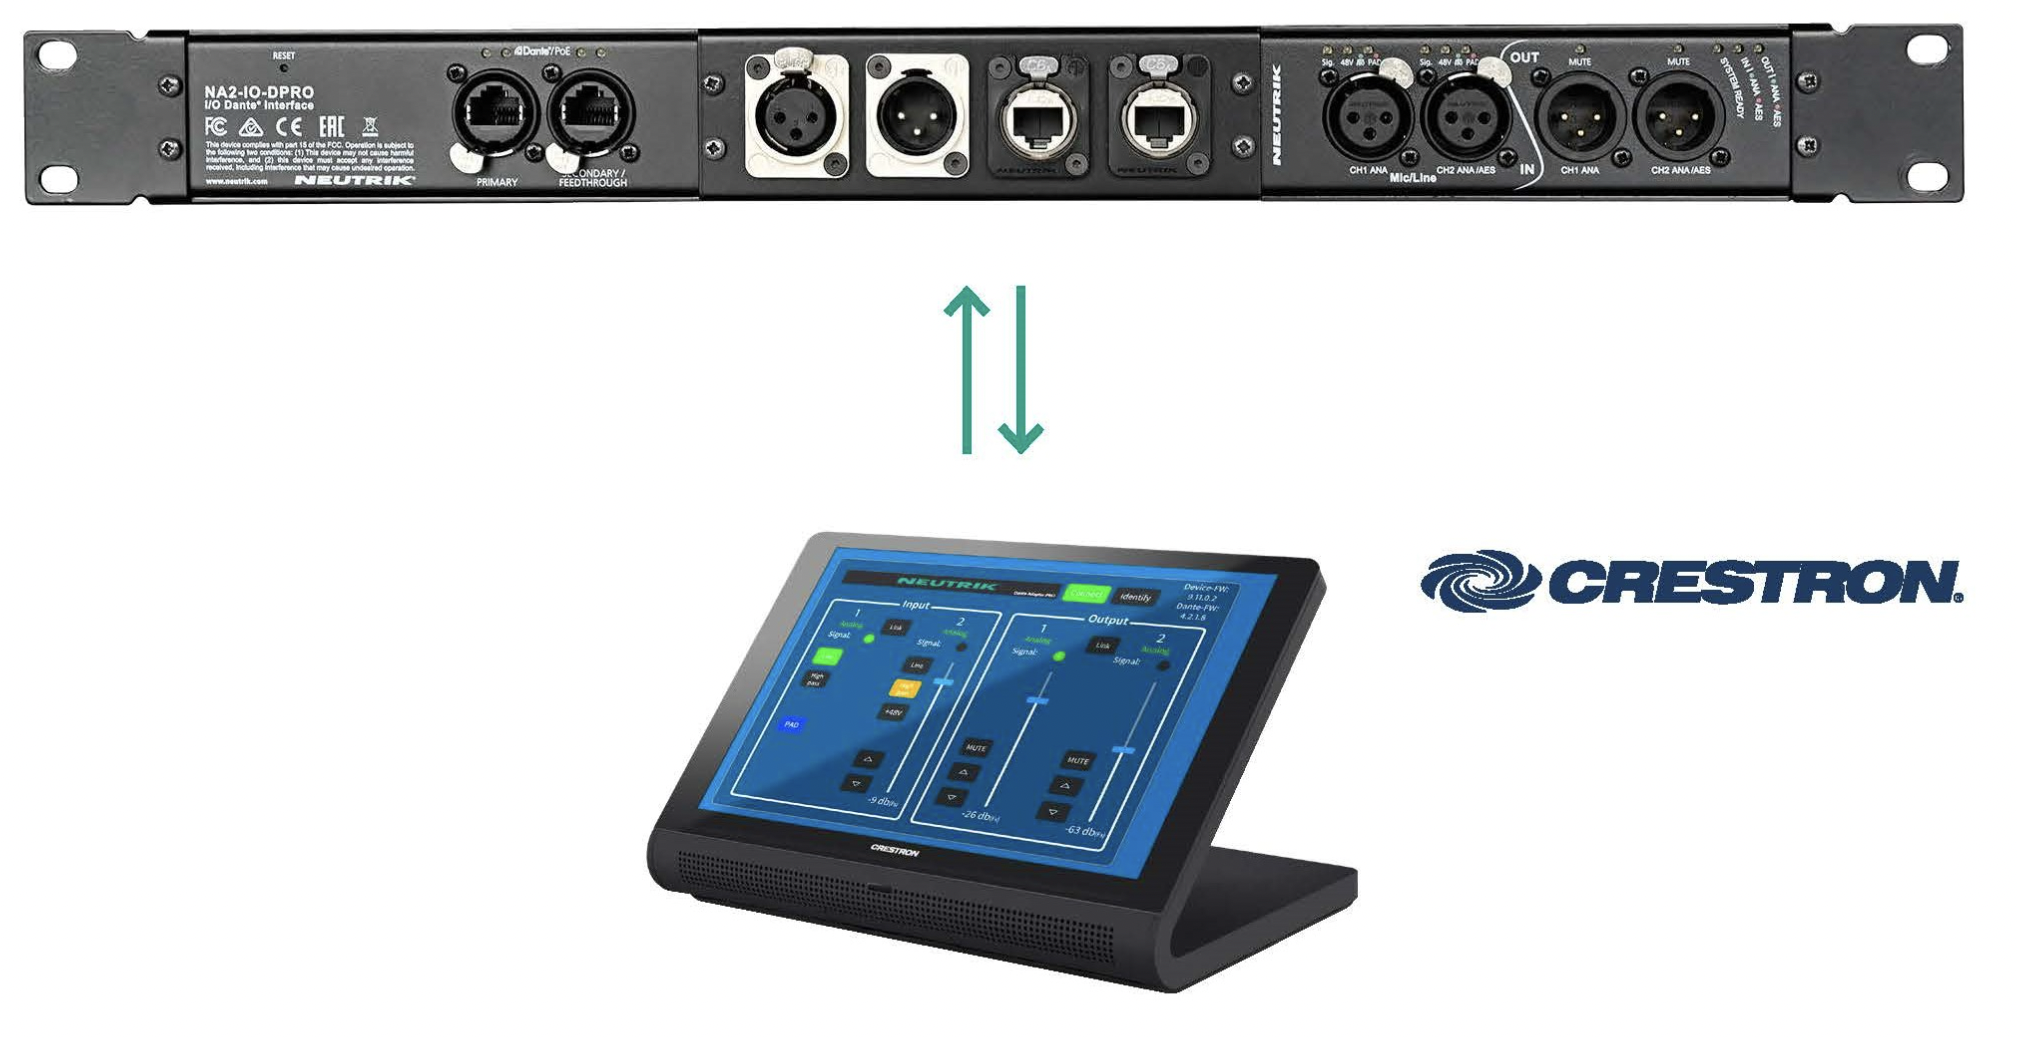 Neutrik now features full integration with Crestron control products to remote control the NA2-IO-DPRO